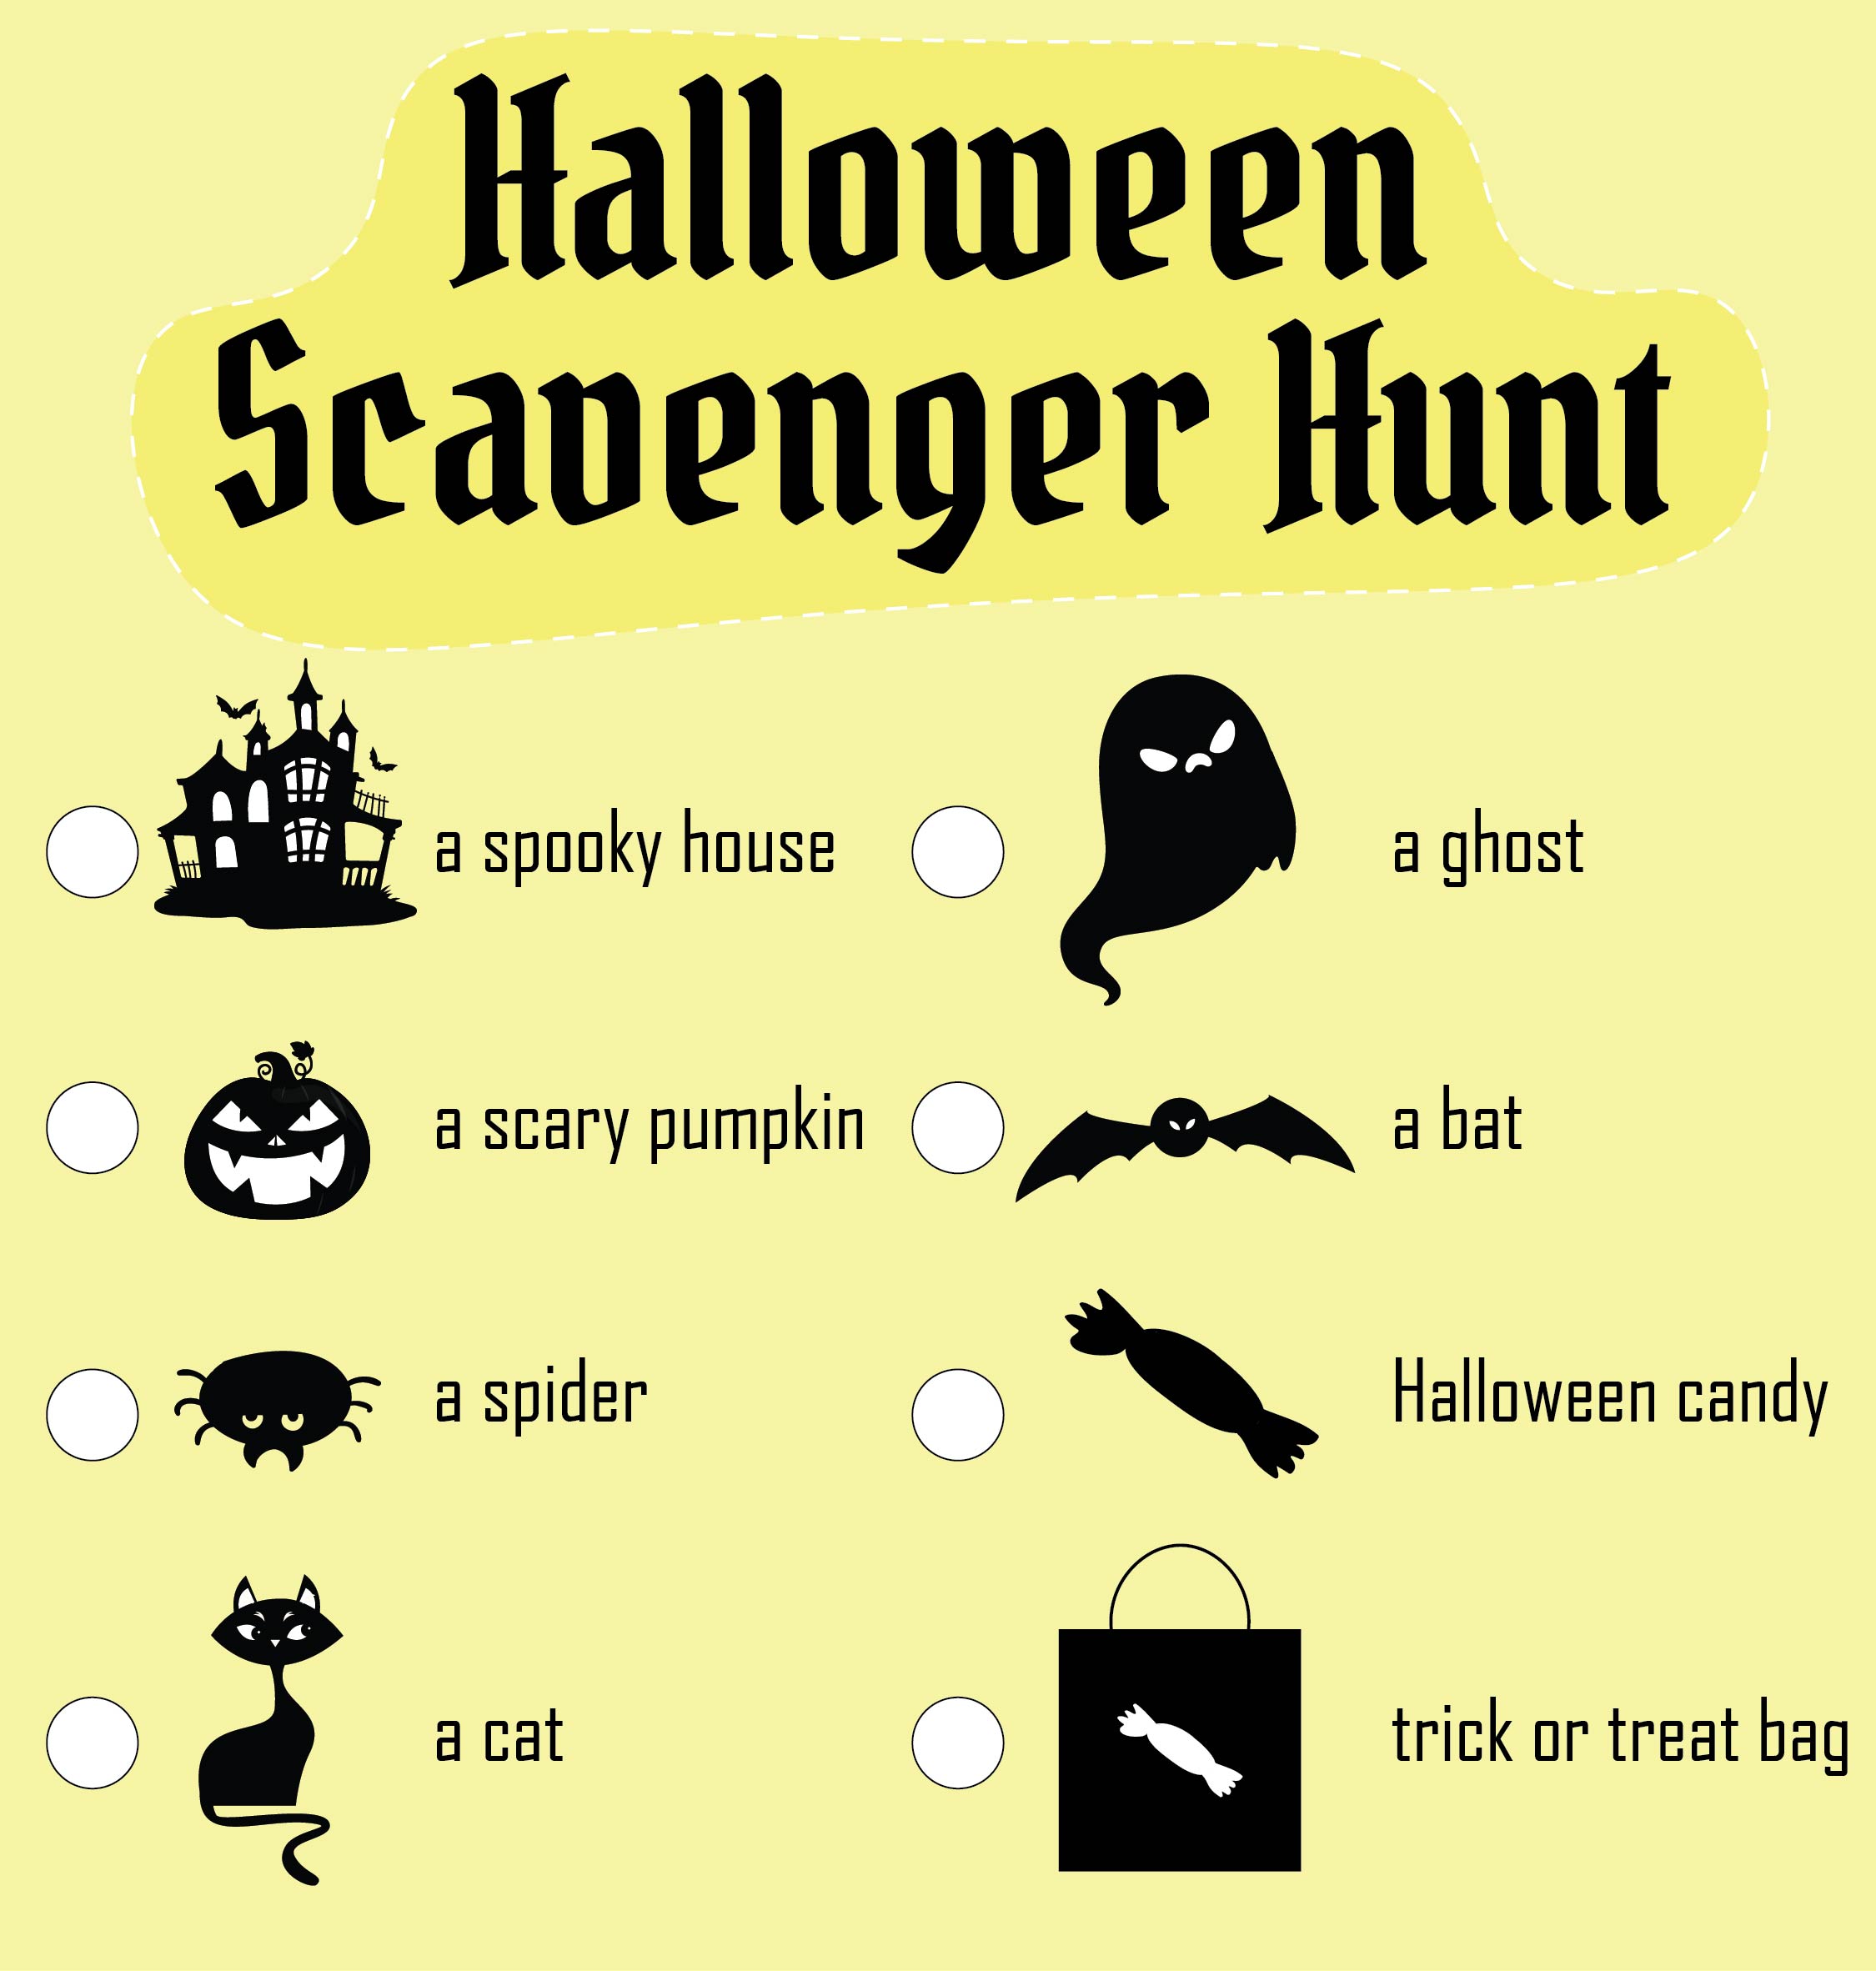 halloween-printable-images-gallery-category-page-8-printablee